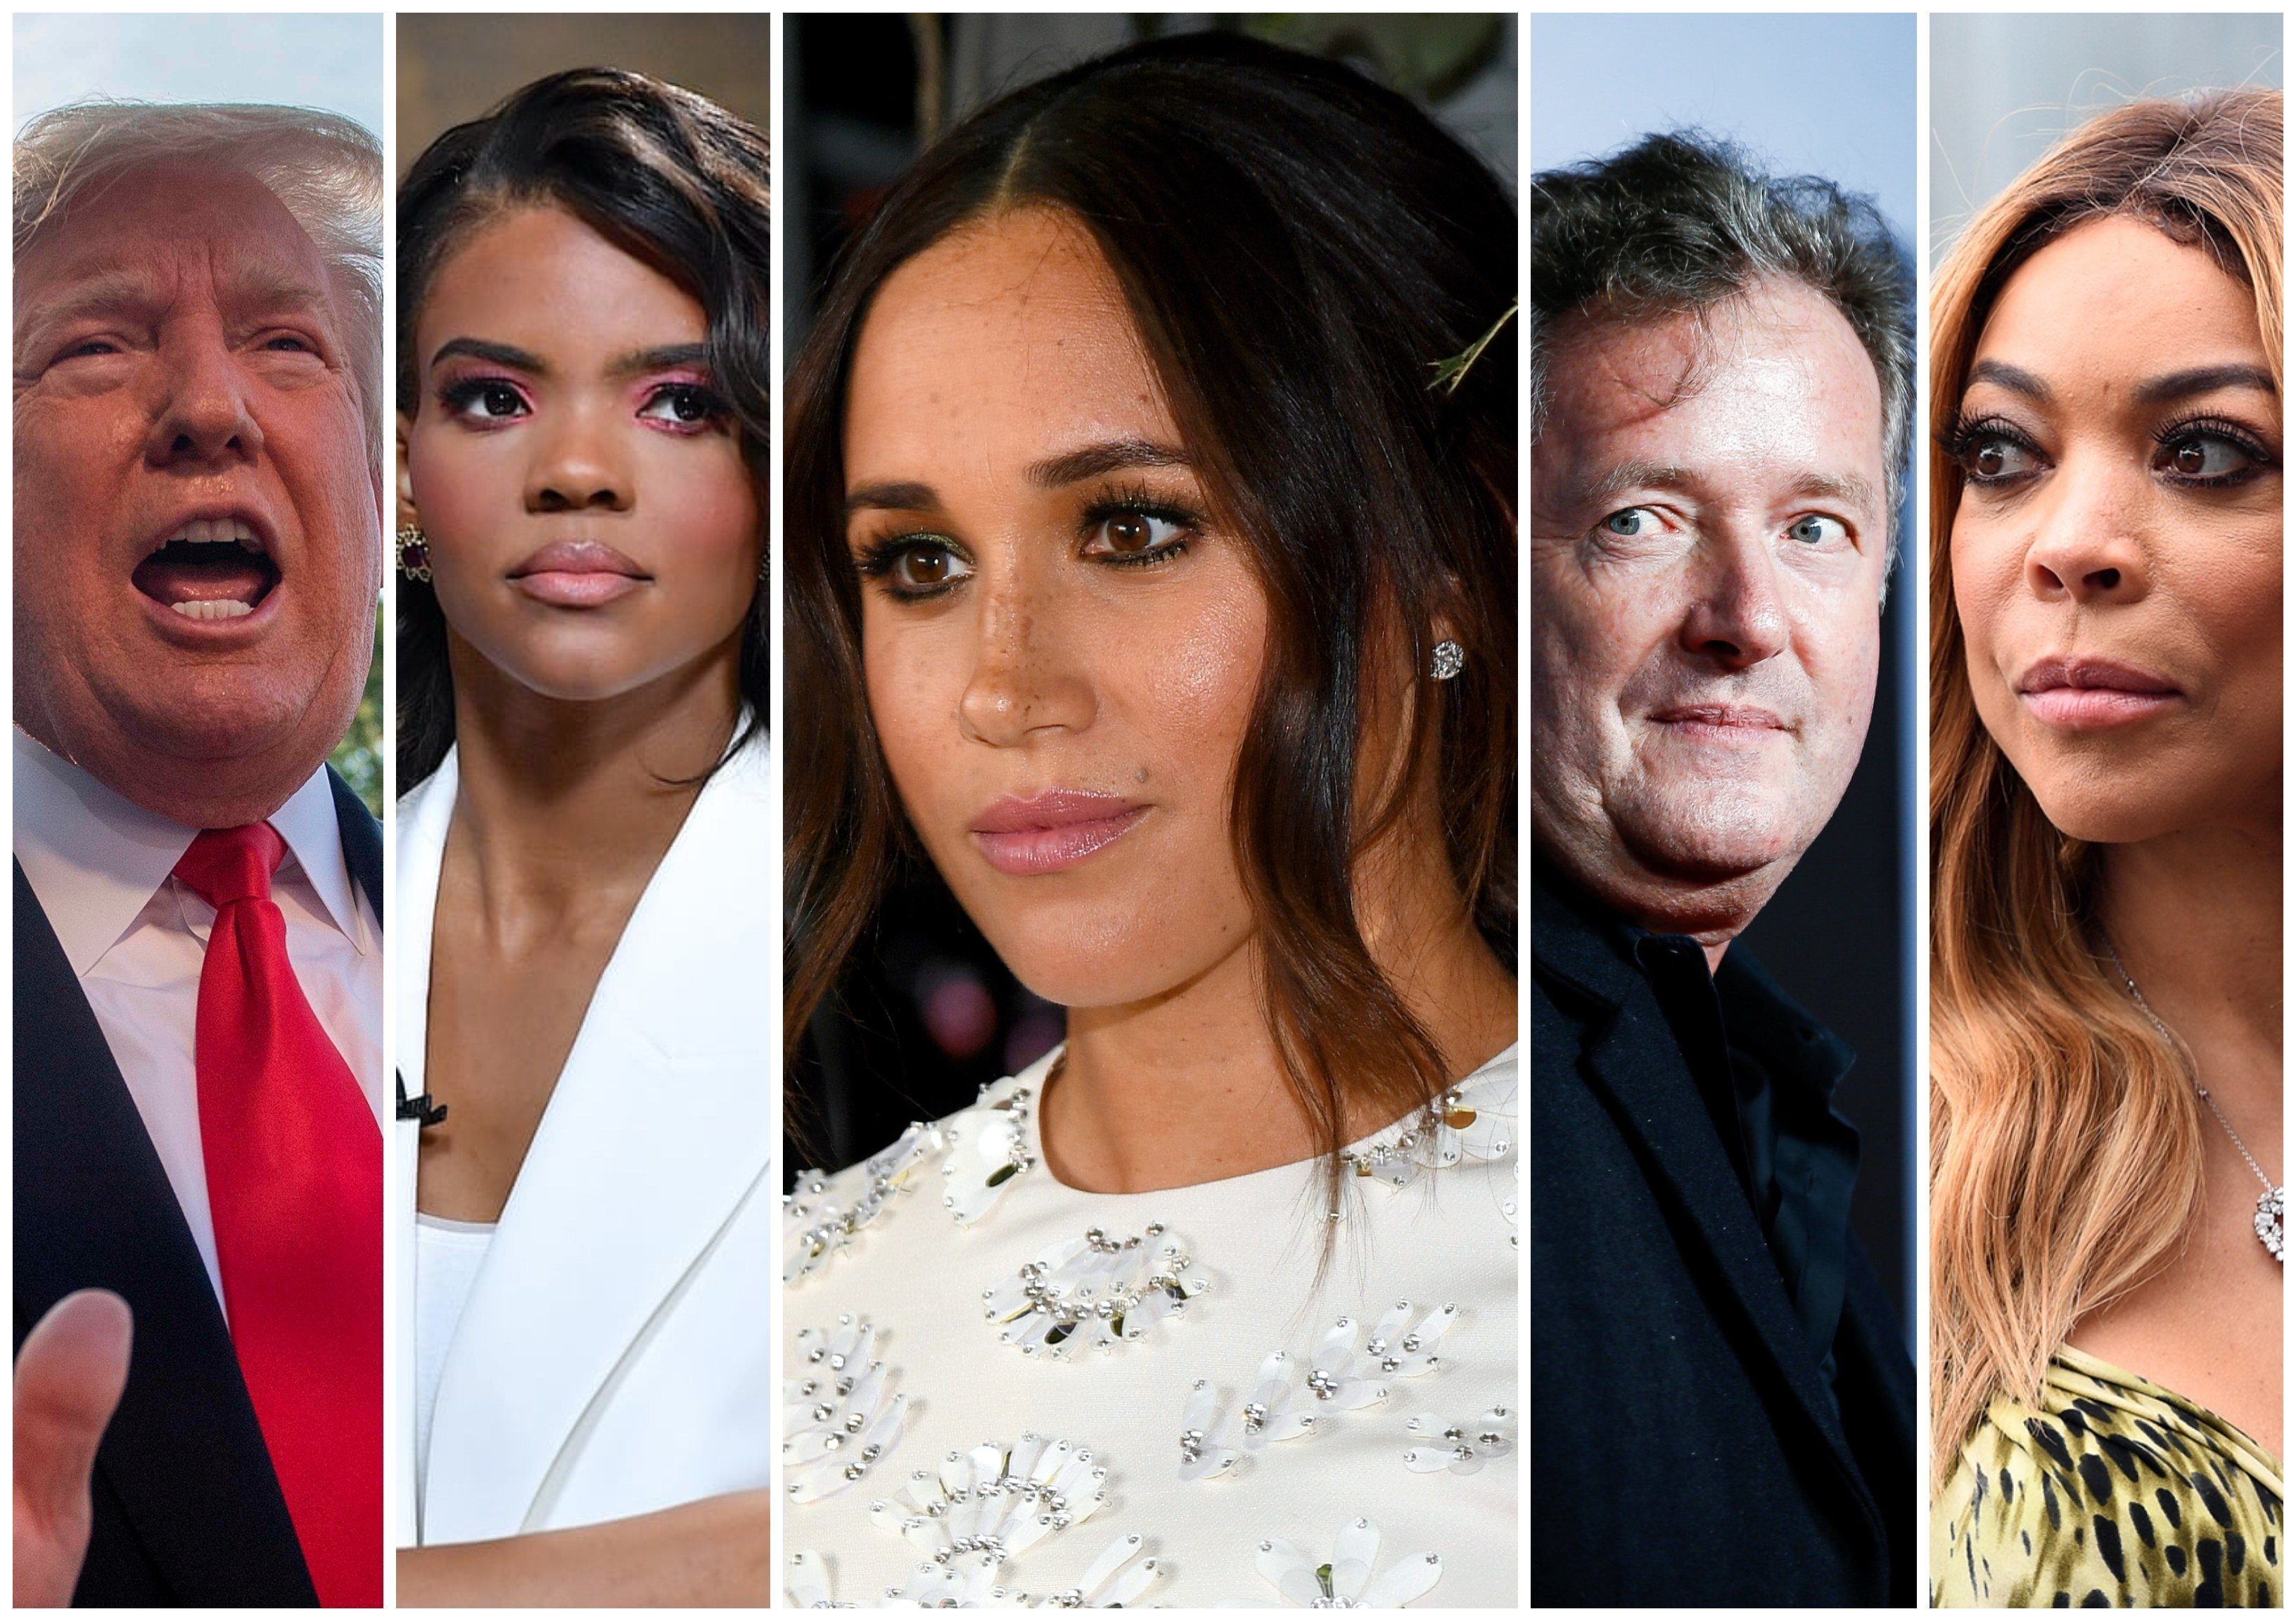 Which celebrity hater threw the most shade Meghan Markle’s way? Photo: Getty Images, Handouts, Bravo